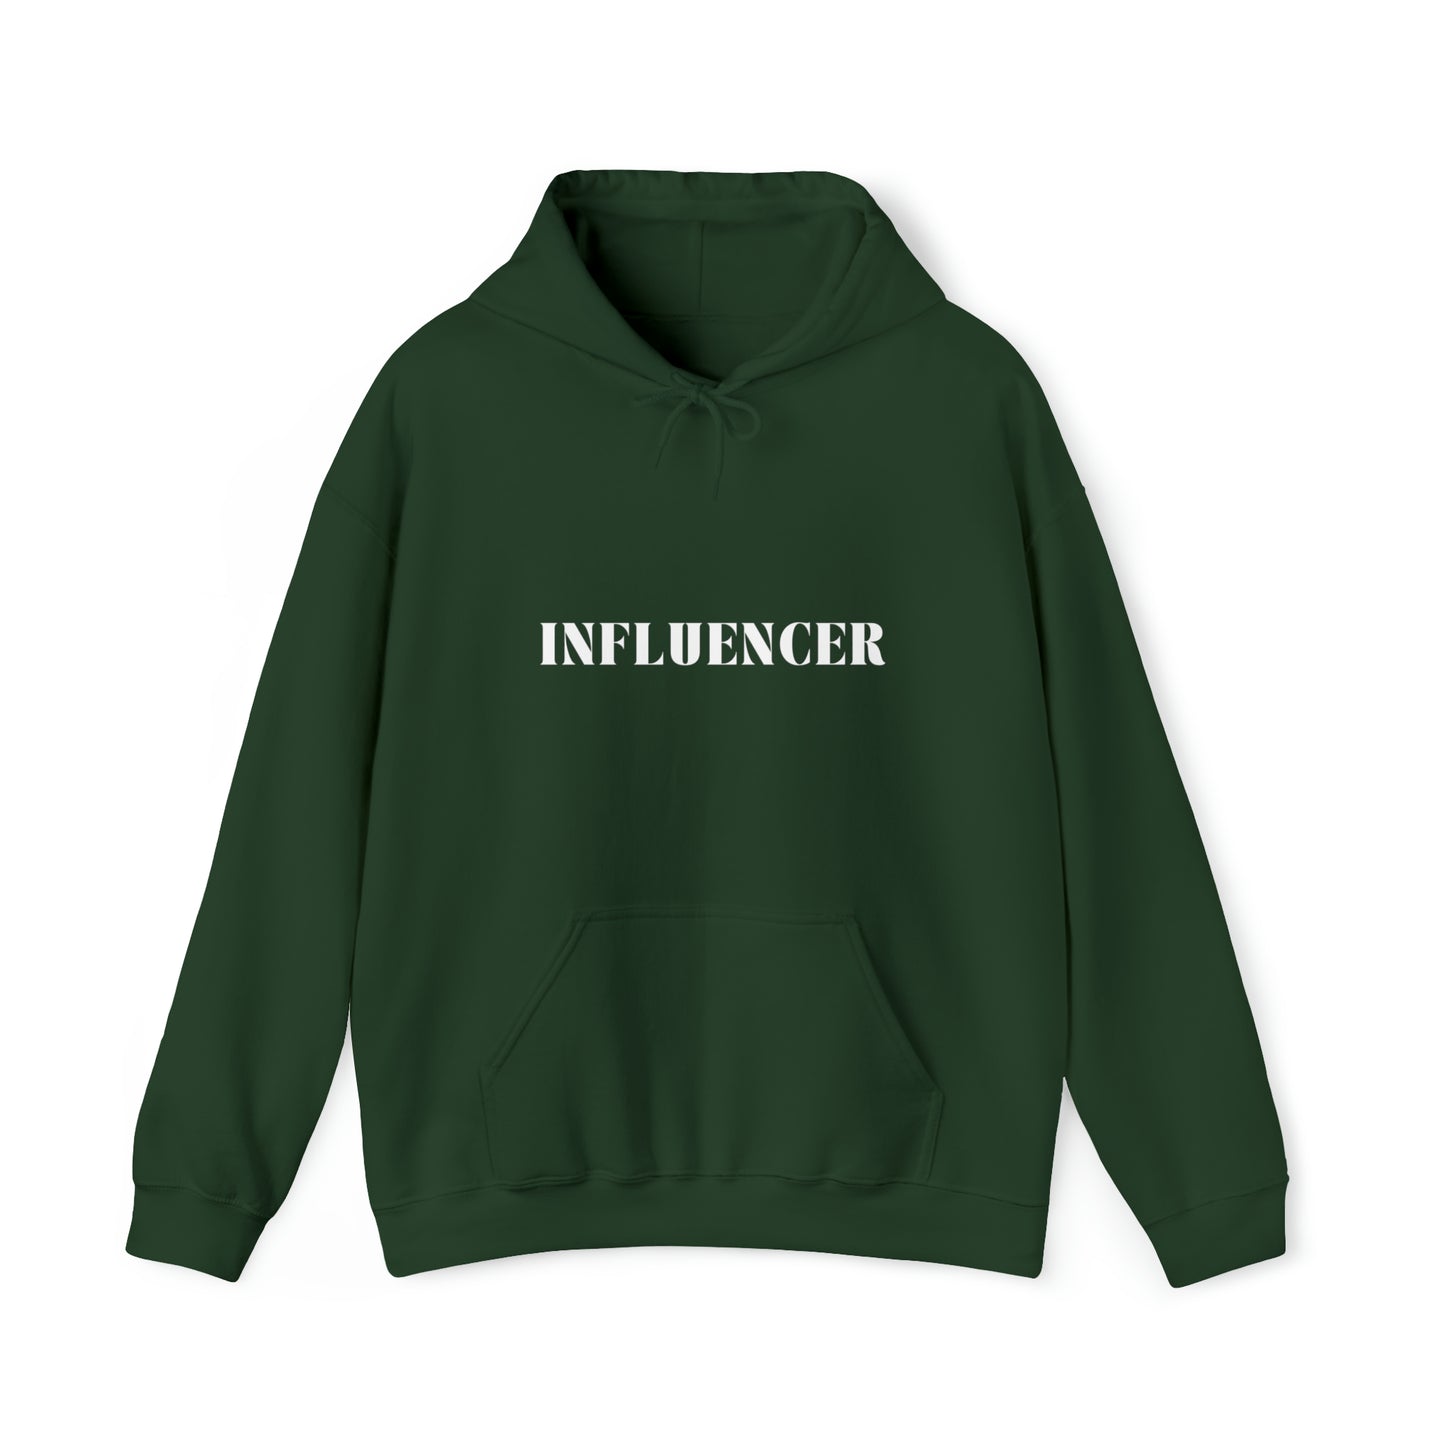 S Forest Green Influencer Hoodie from HoodySZN.com